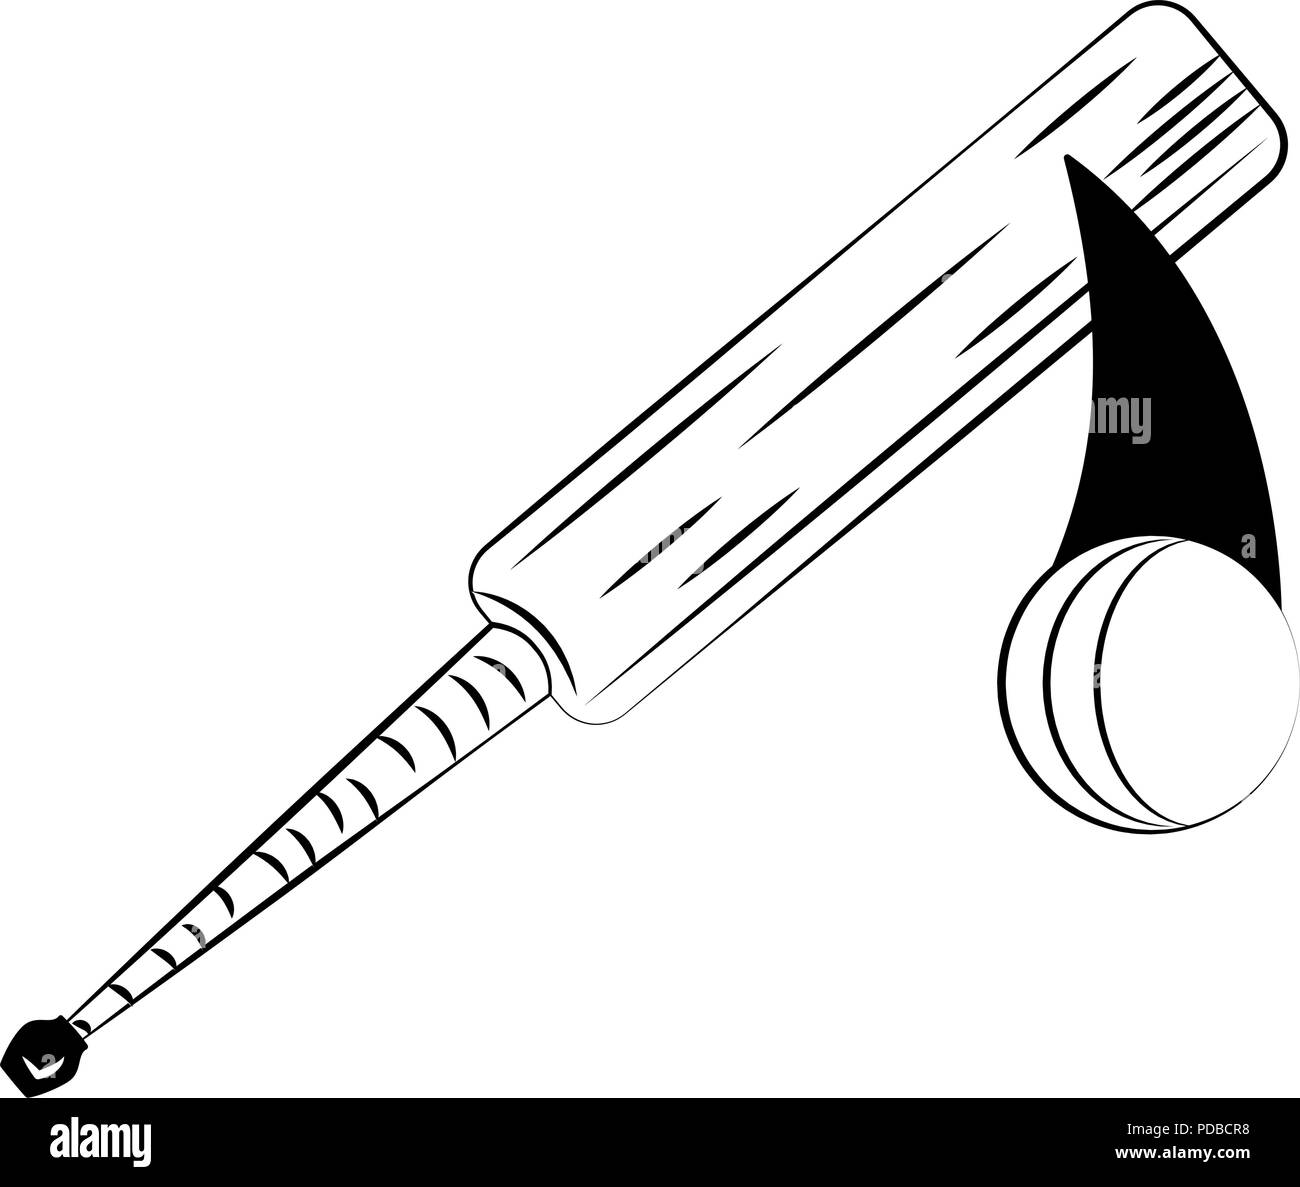 Crickect racket and ball in black and white Stock Vector